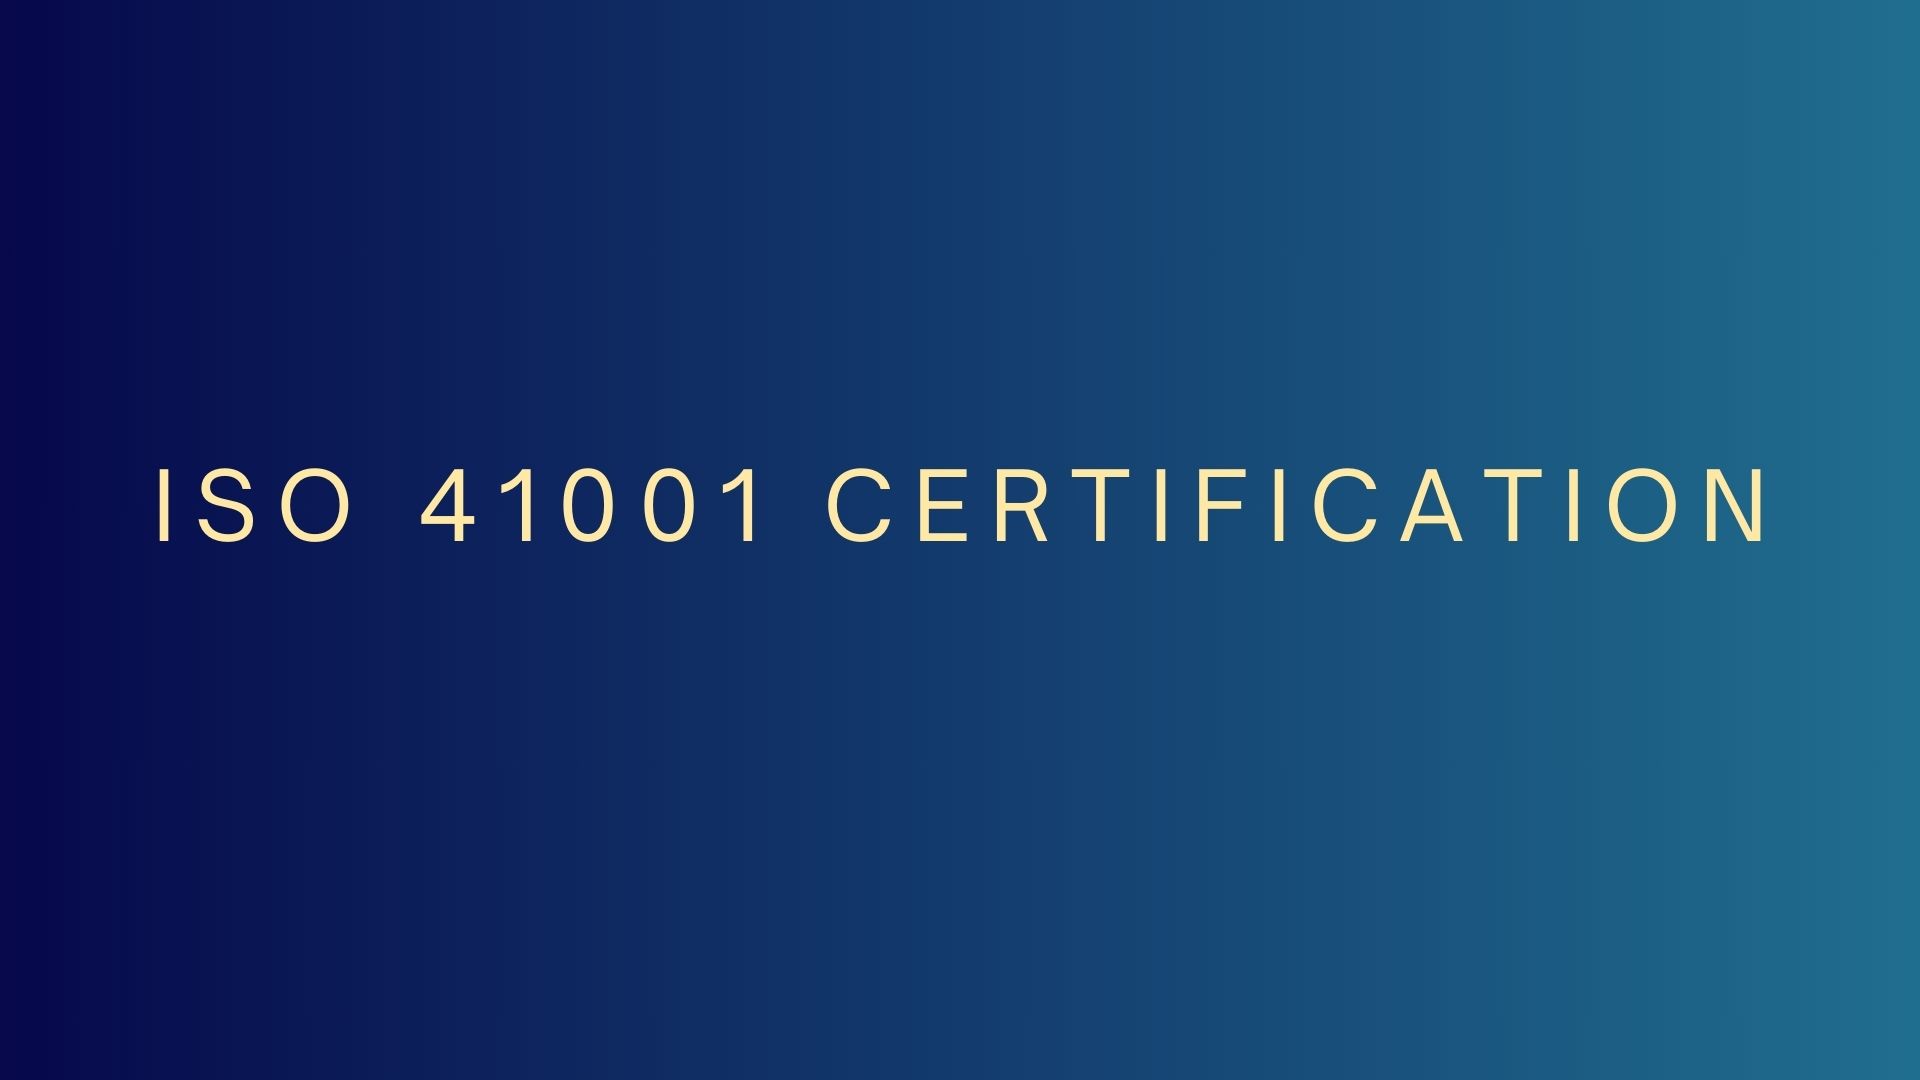 ISO 41001 certification